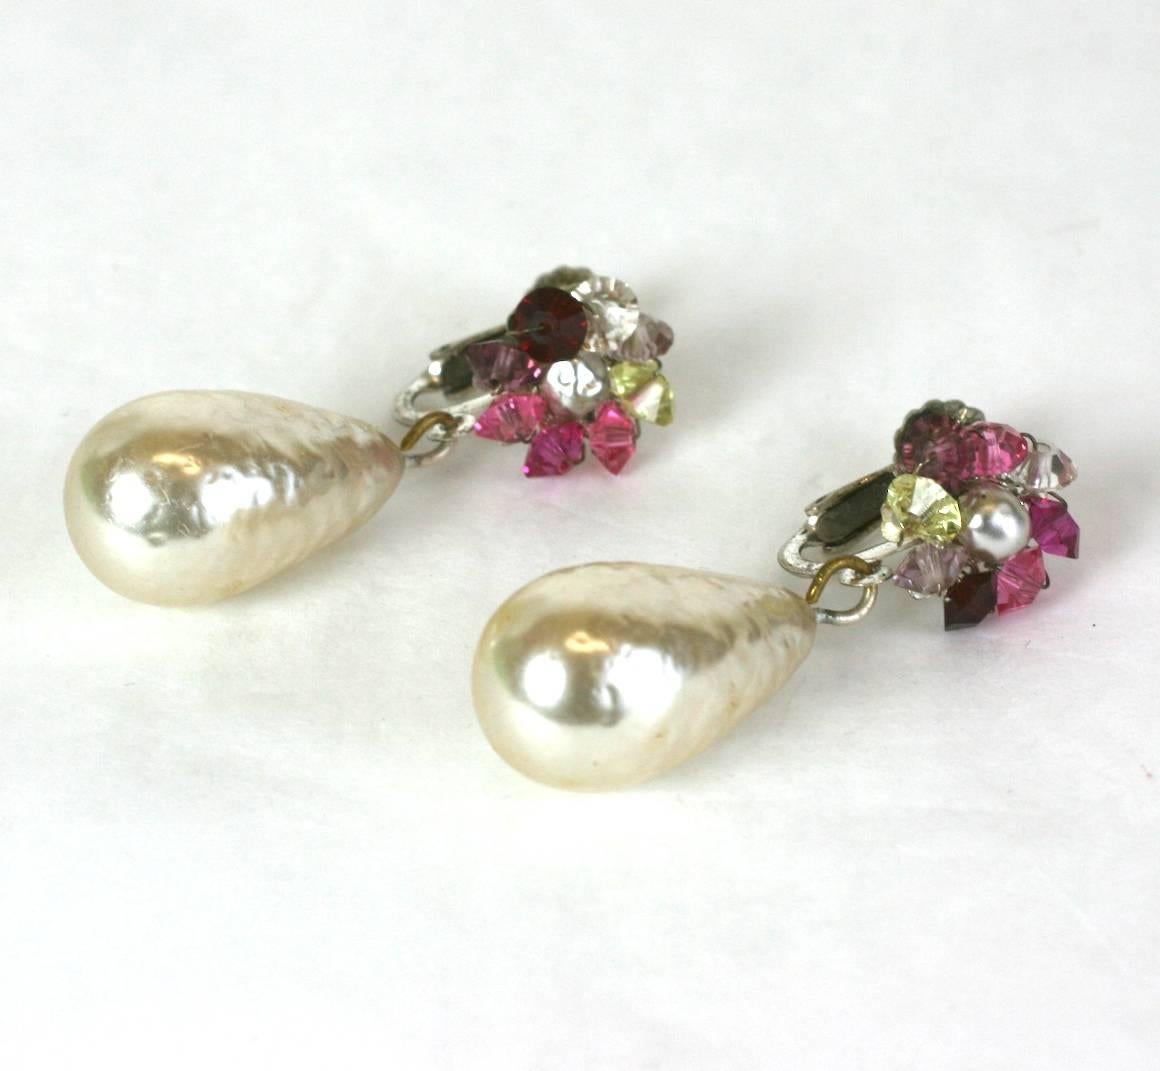 Miiam Haskell signature teardrop baroque pearl and Swarovski hand sewn crystals in varied shades of ruby and pinks, set in silver gilt filigree. Adjustable clip back fittings. 
Excellent Condition. 
Length 1.50